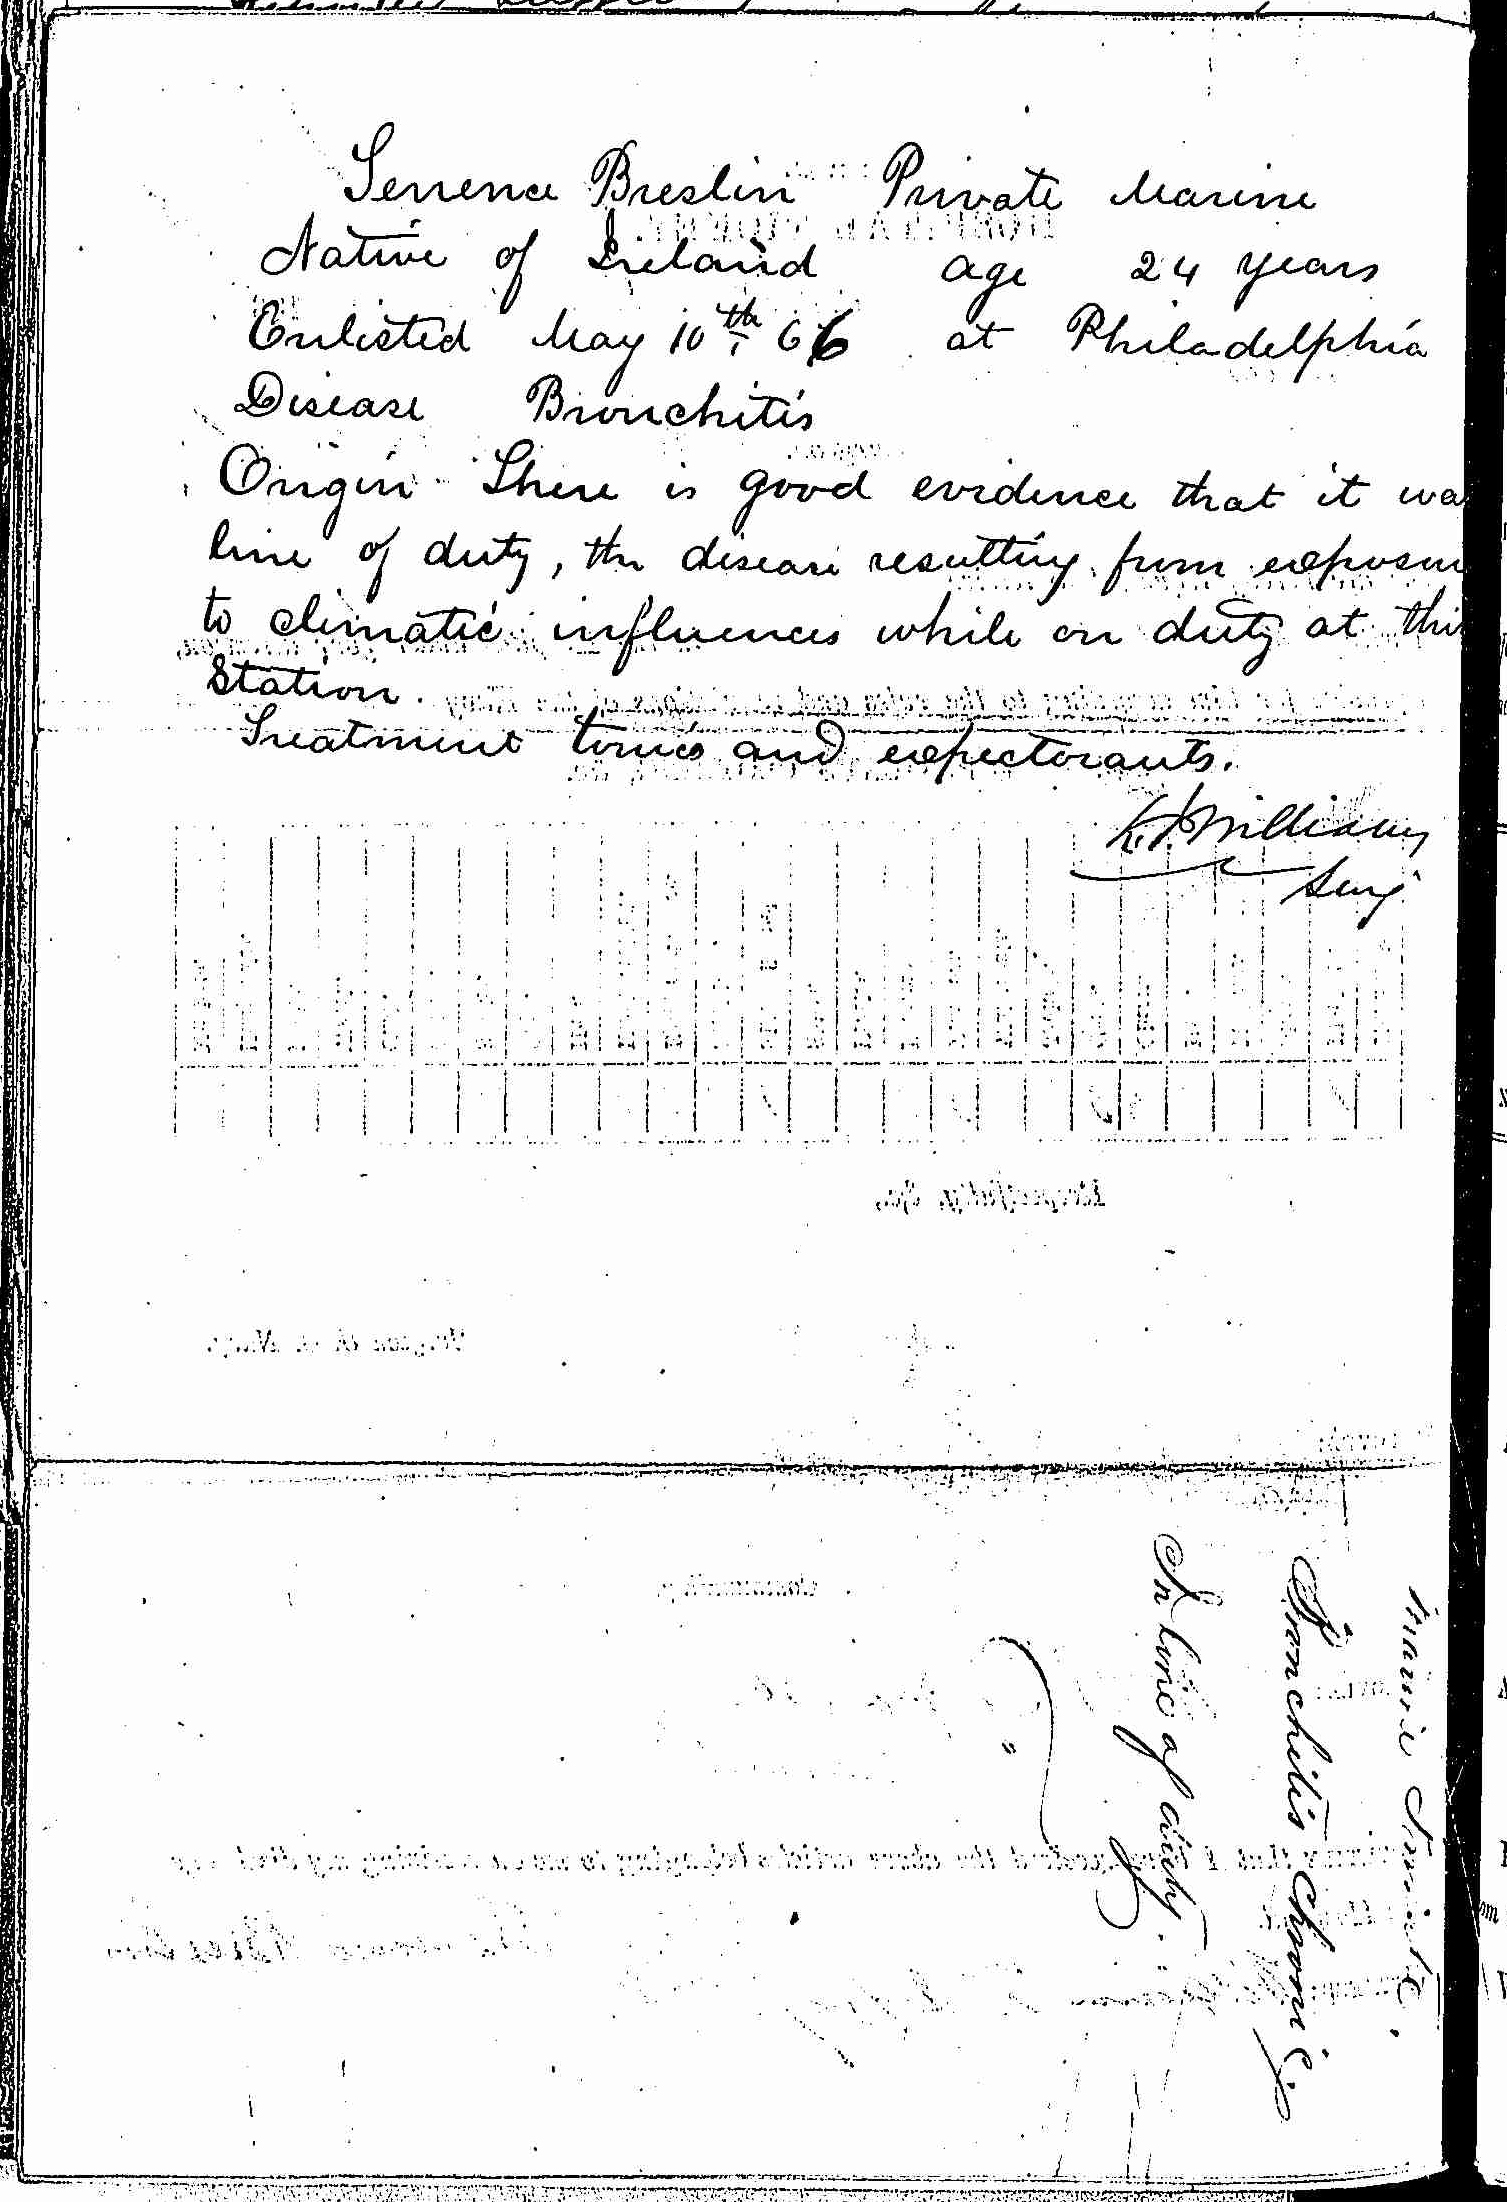 Entry for Terrence Breslin (first admission page 2 of 2) in the log Hospital Tickets and Case Papers - Naval Hospital - Washington, D.C. - 1866-68